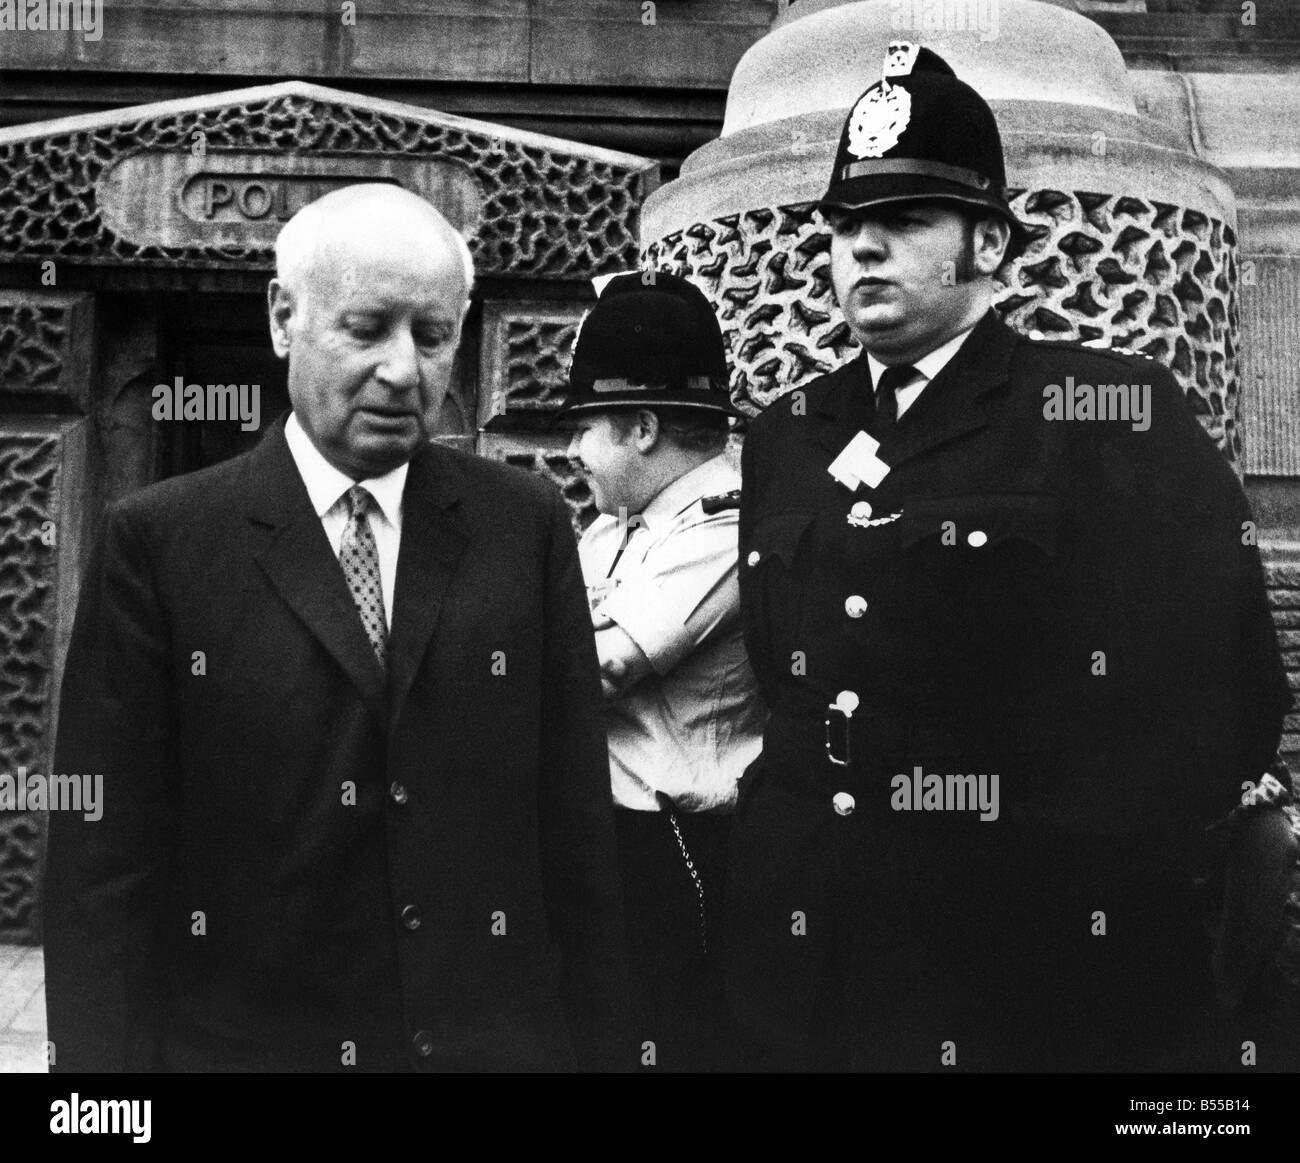 John Poulson former international architect leaves Leeds Magistrates court after being charged with involvement in bribery conspiracy. June 1973 P012529 Stock Photo